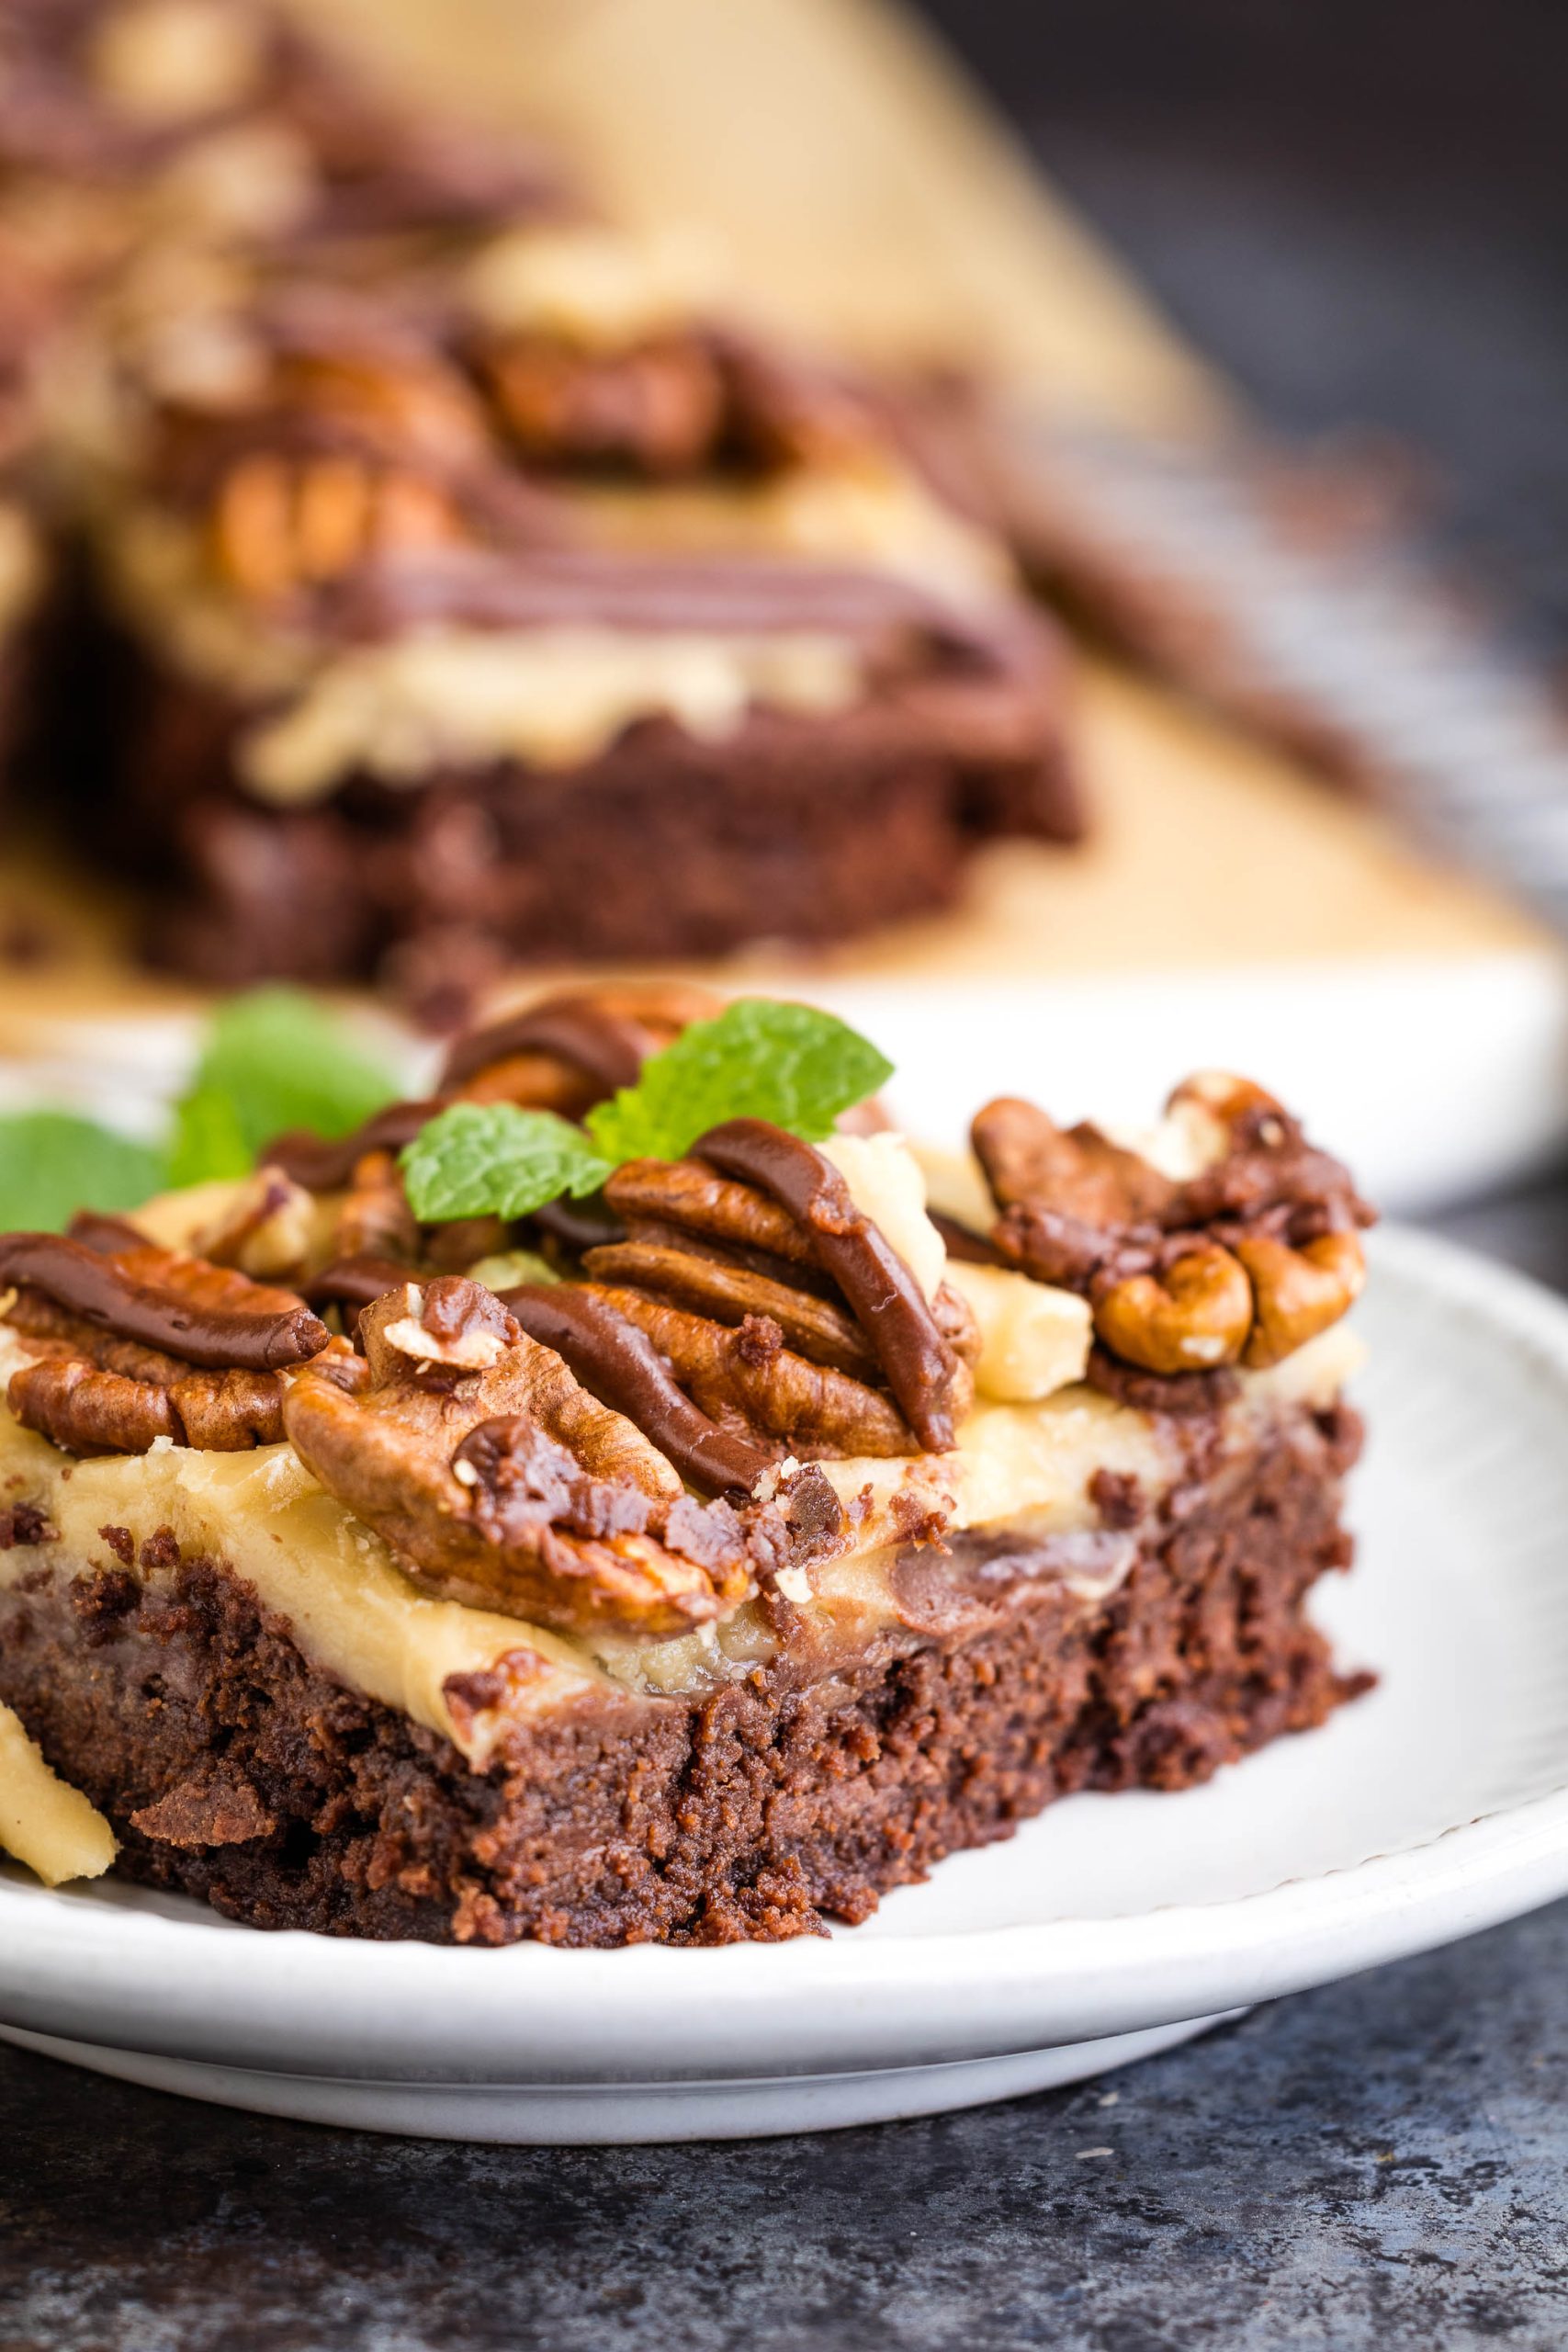 A piece of brownie with pecans and mint on a plate.